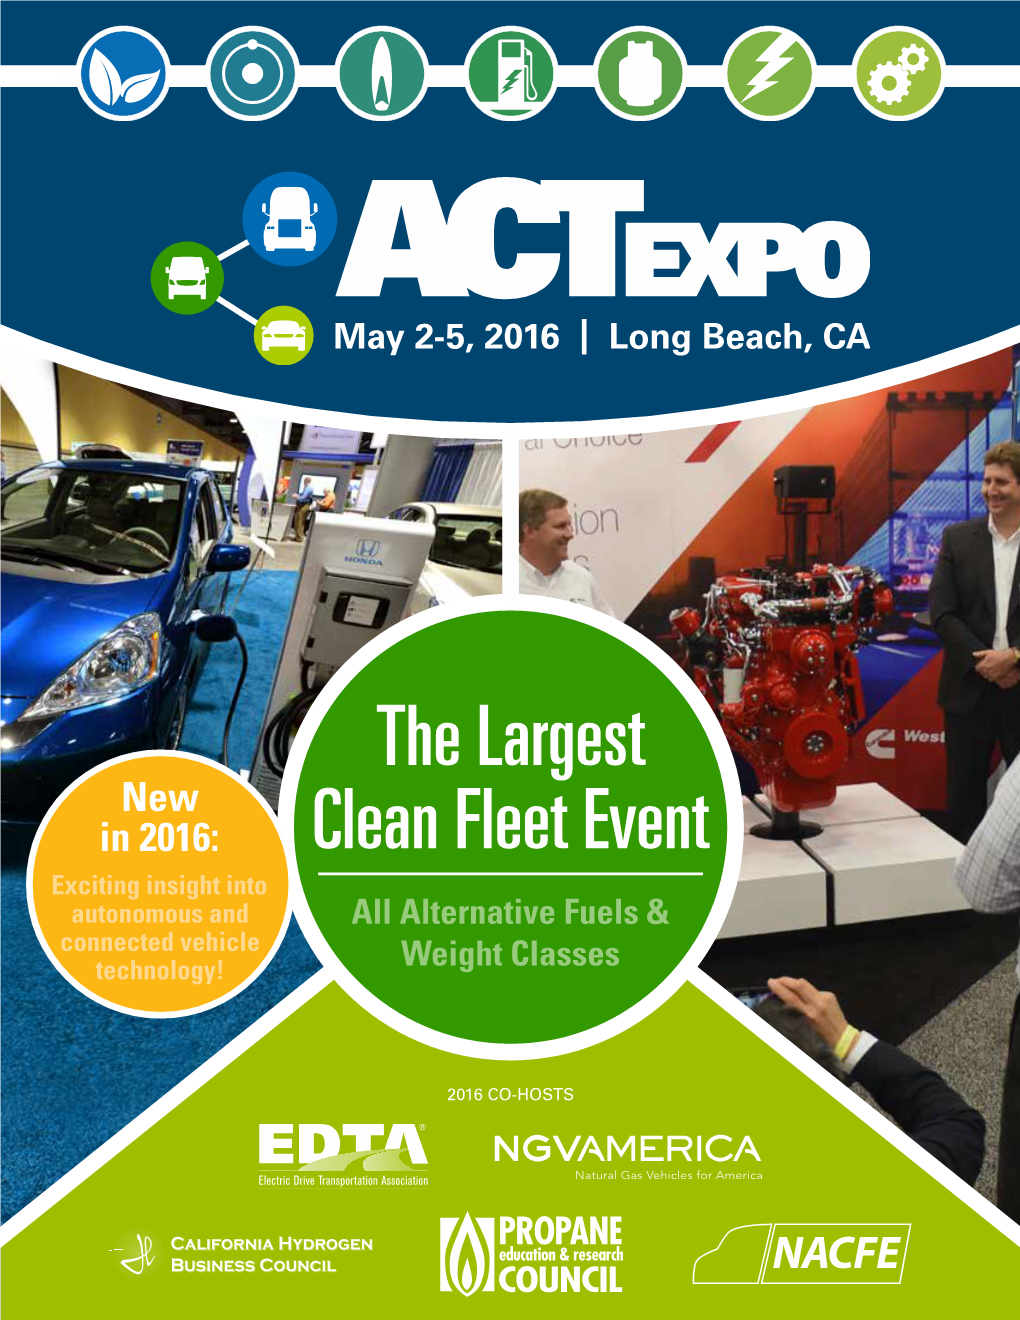 The Largest Clean Fleet Event